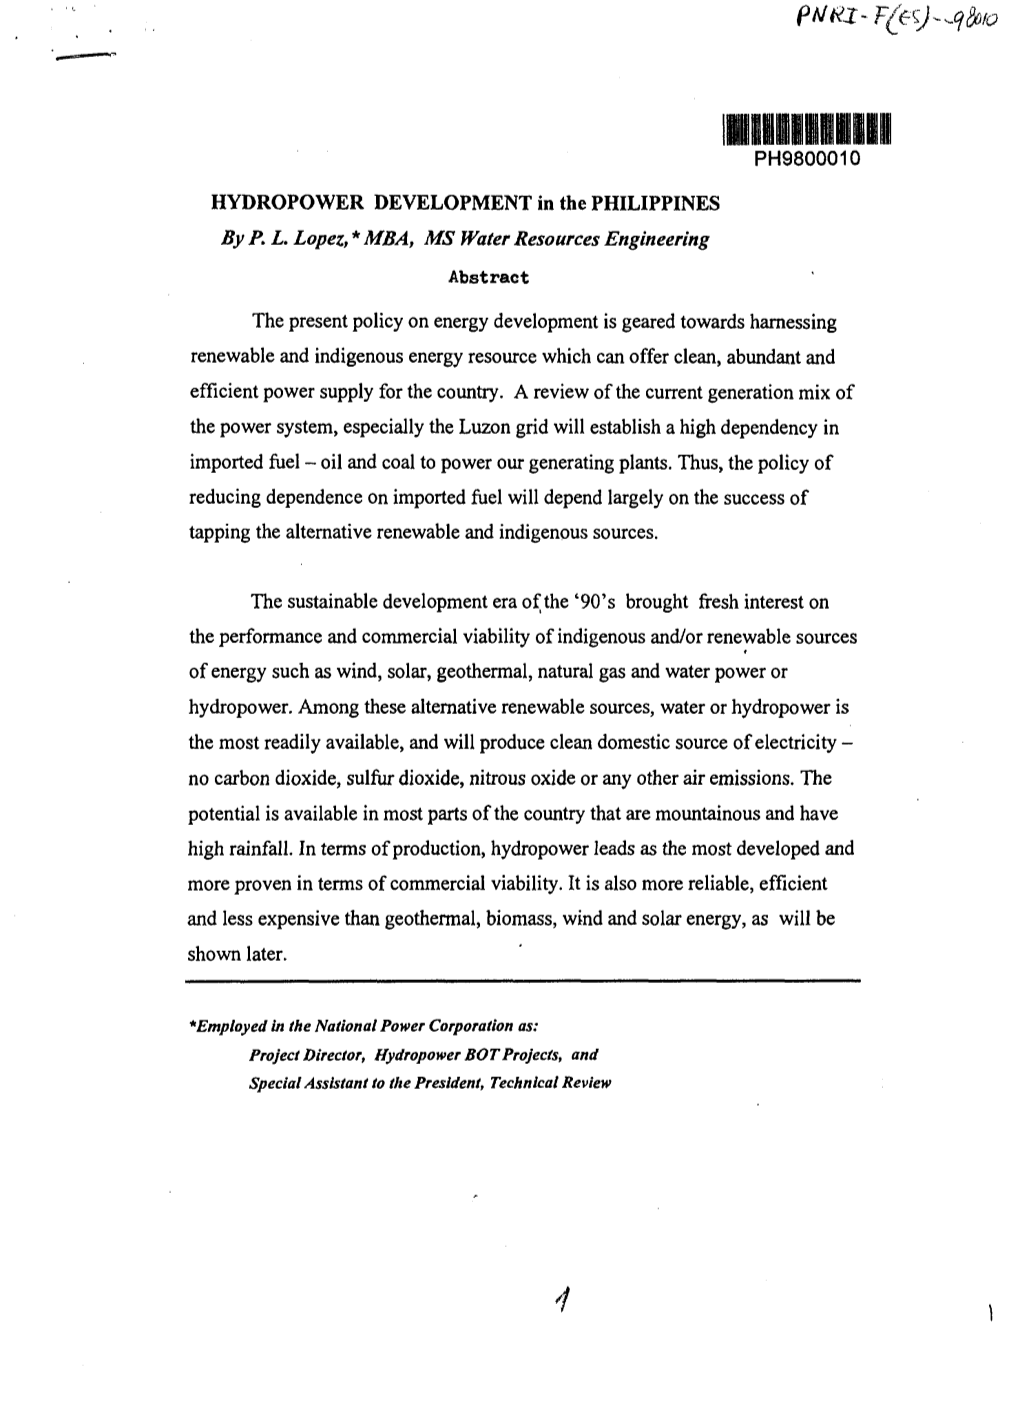 PH9800010 HYDROPOWER DEVELOPMENT in the PHILIPPINES by P. L. Lopez, * MBA, MS Water Resources Engineering Abstract